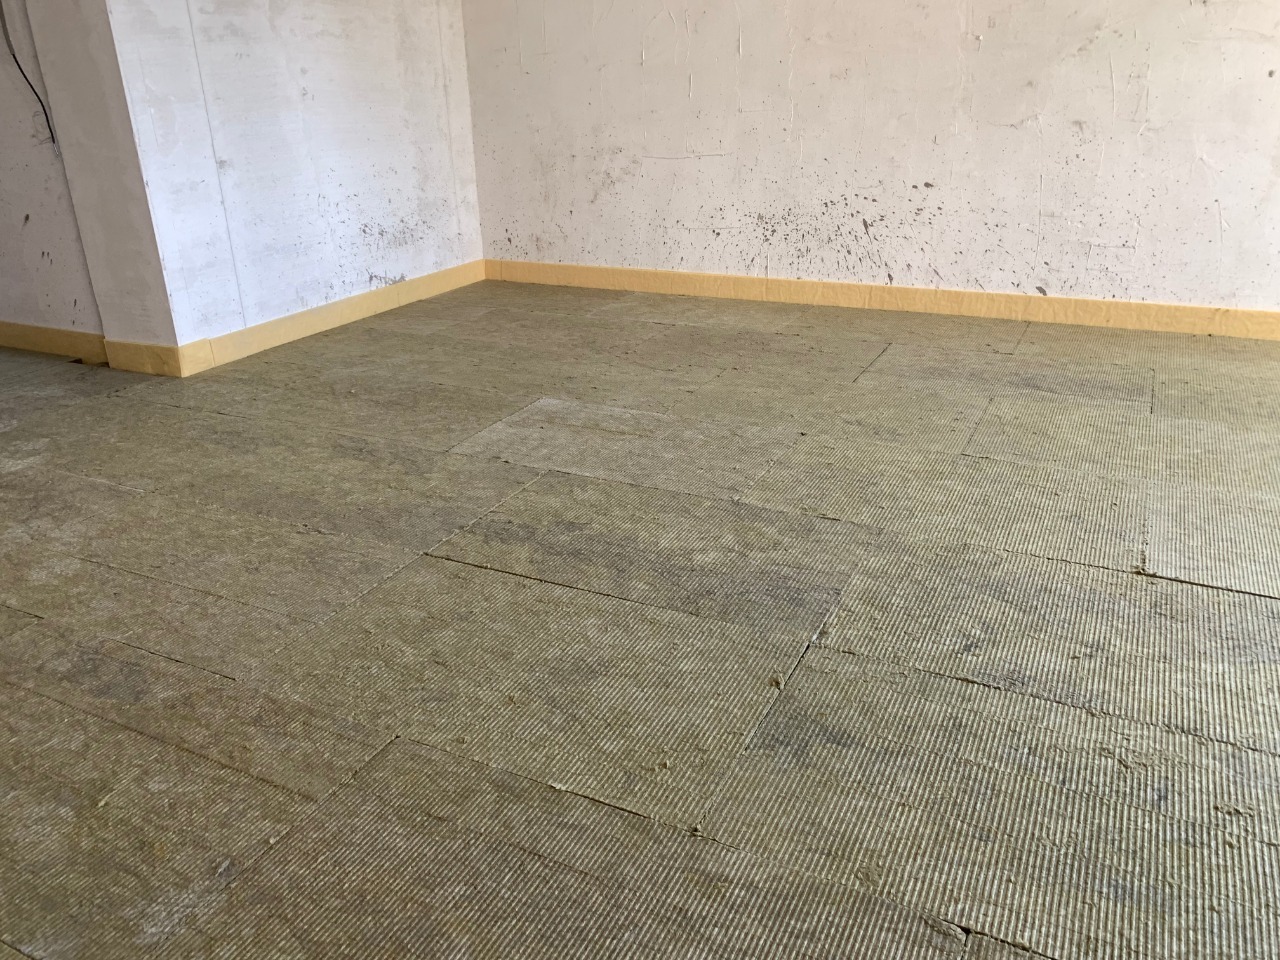 Soundproofing of floors (screeds, joists, etc.) - My, Soundproofing, Noise isolation, Violation of peace and quiet, Construction, Building, Construction and renovation, Small business, Longpost